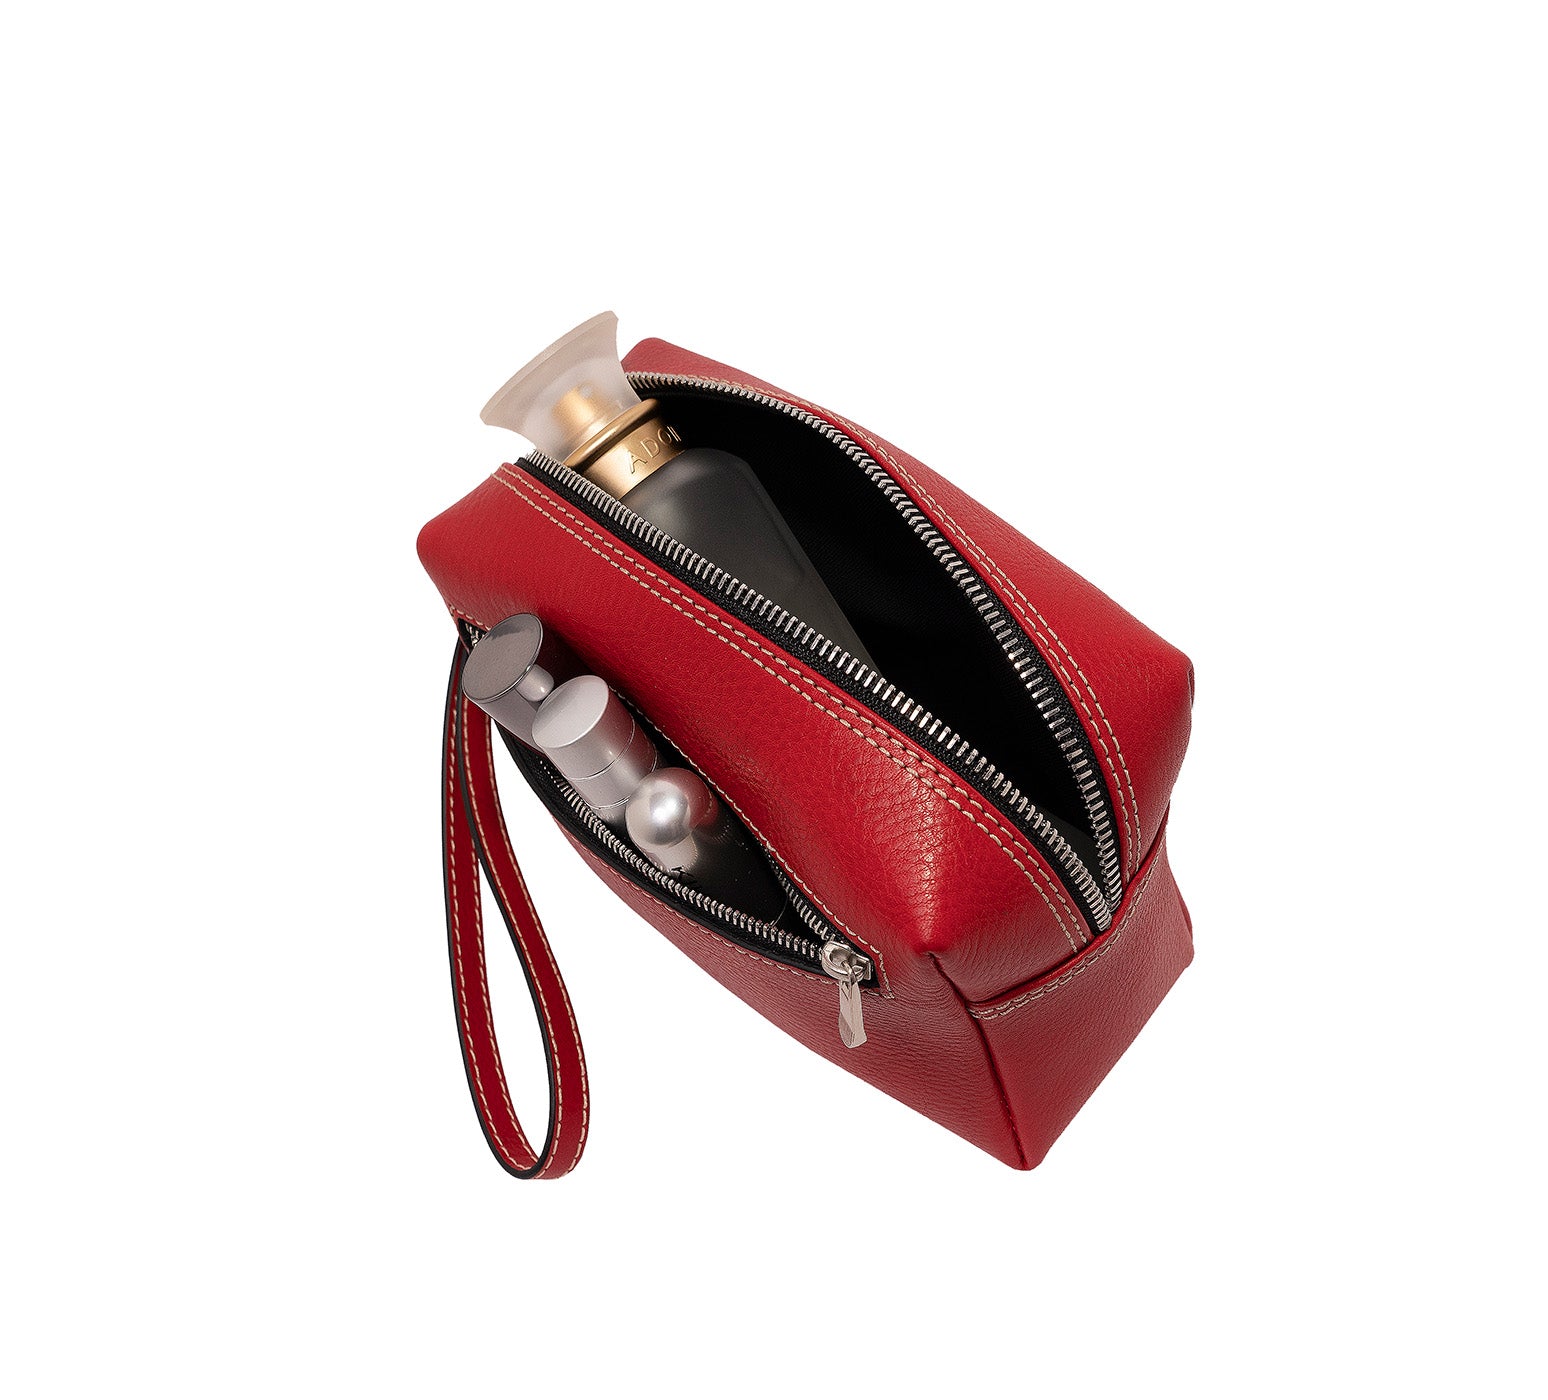 Leather Wrist Bag from Rydal in 'Red' showing contents.